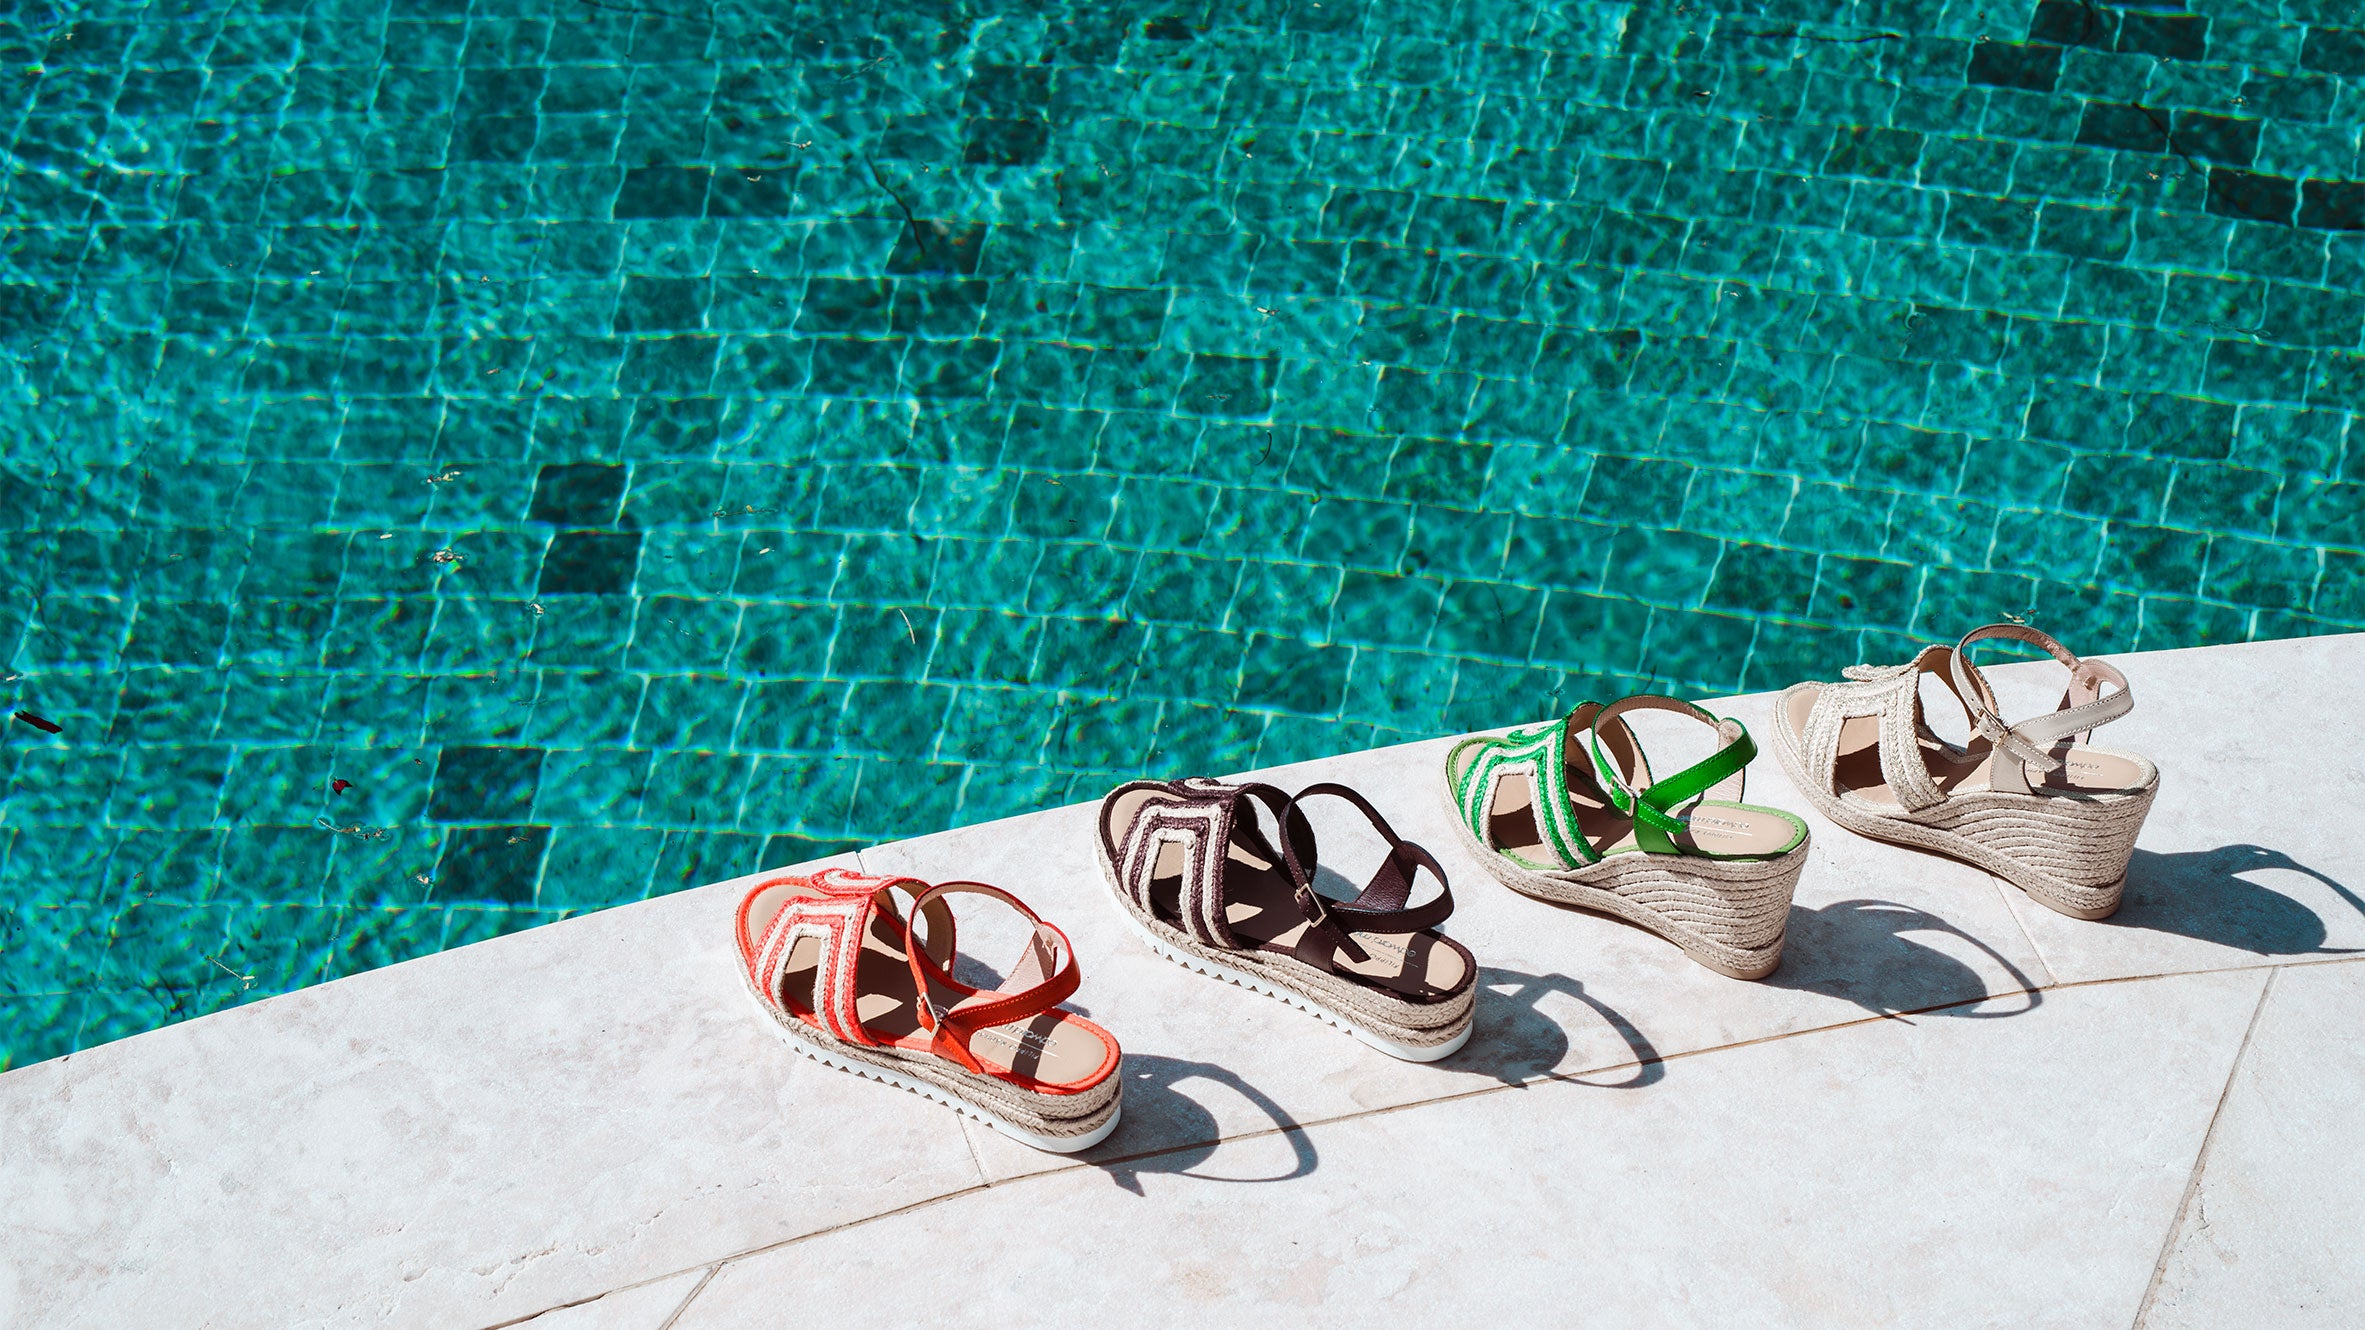 MAYAN & MOTIF espadrilles arranged by the pool